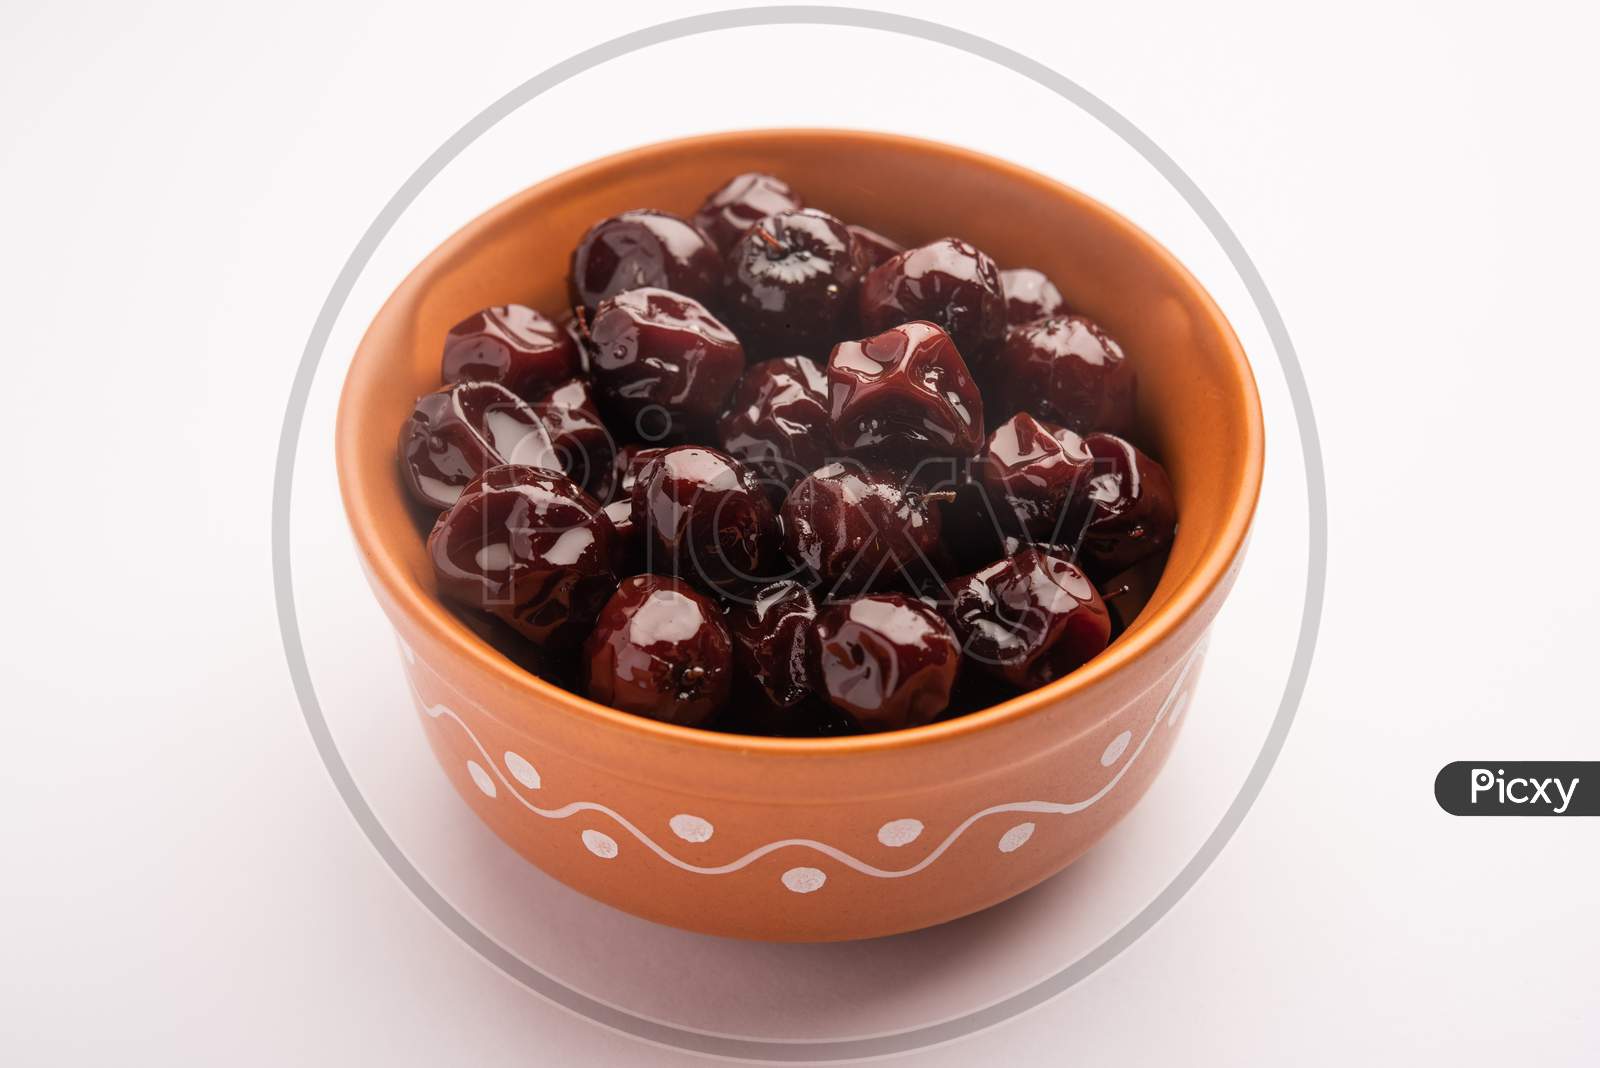 Indian Jujube Or Ber Boiled In Jaggery Syrup Makes A Tasty Snack Food